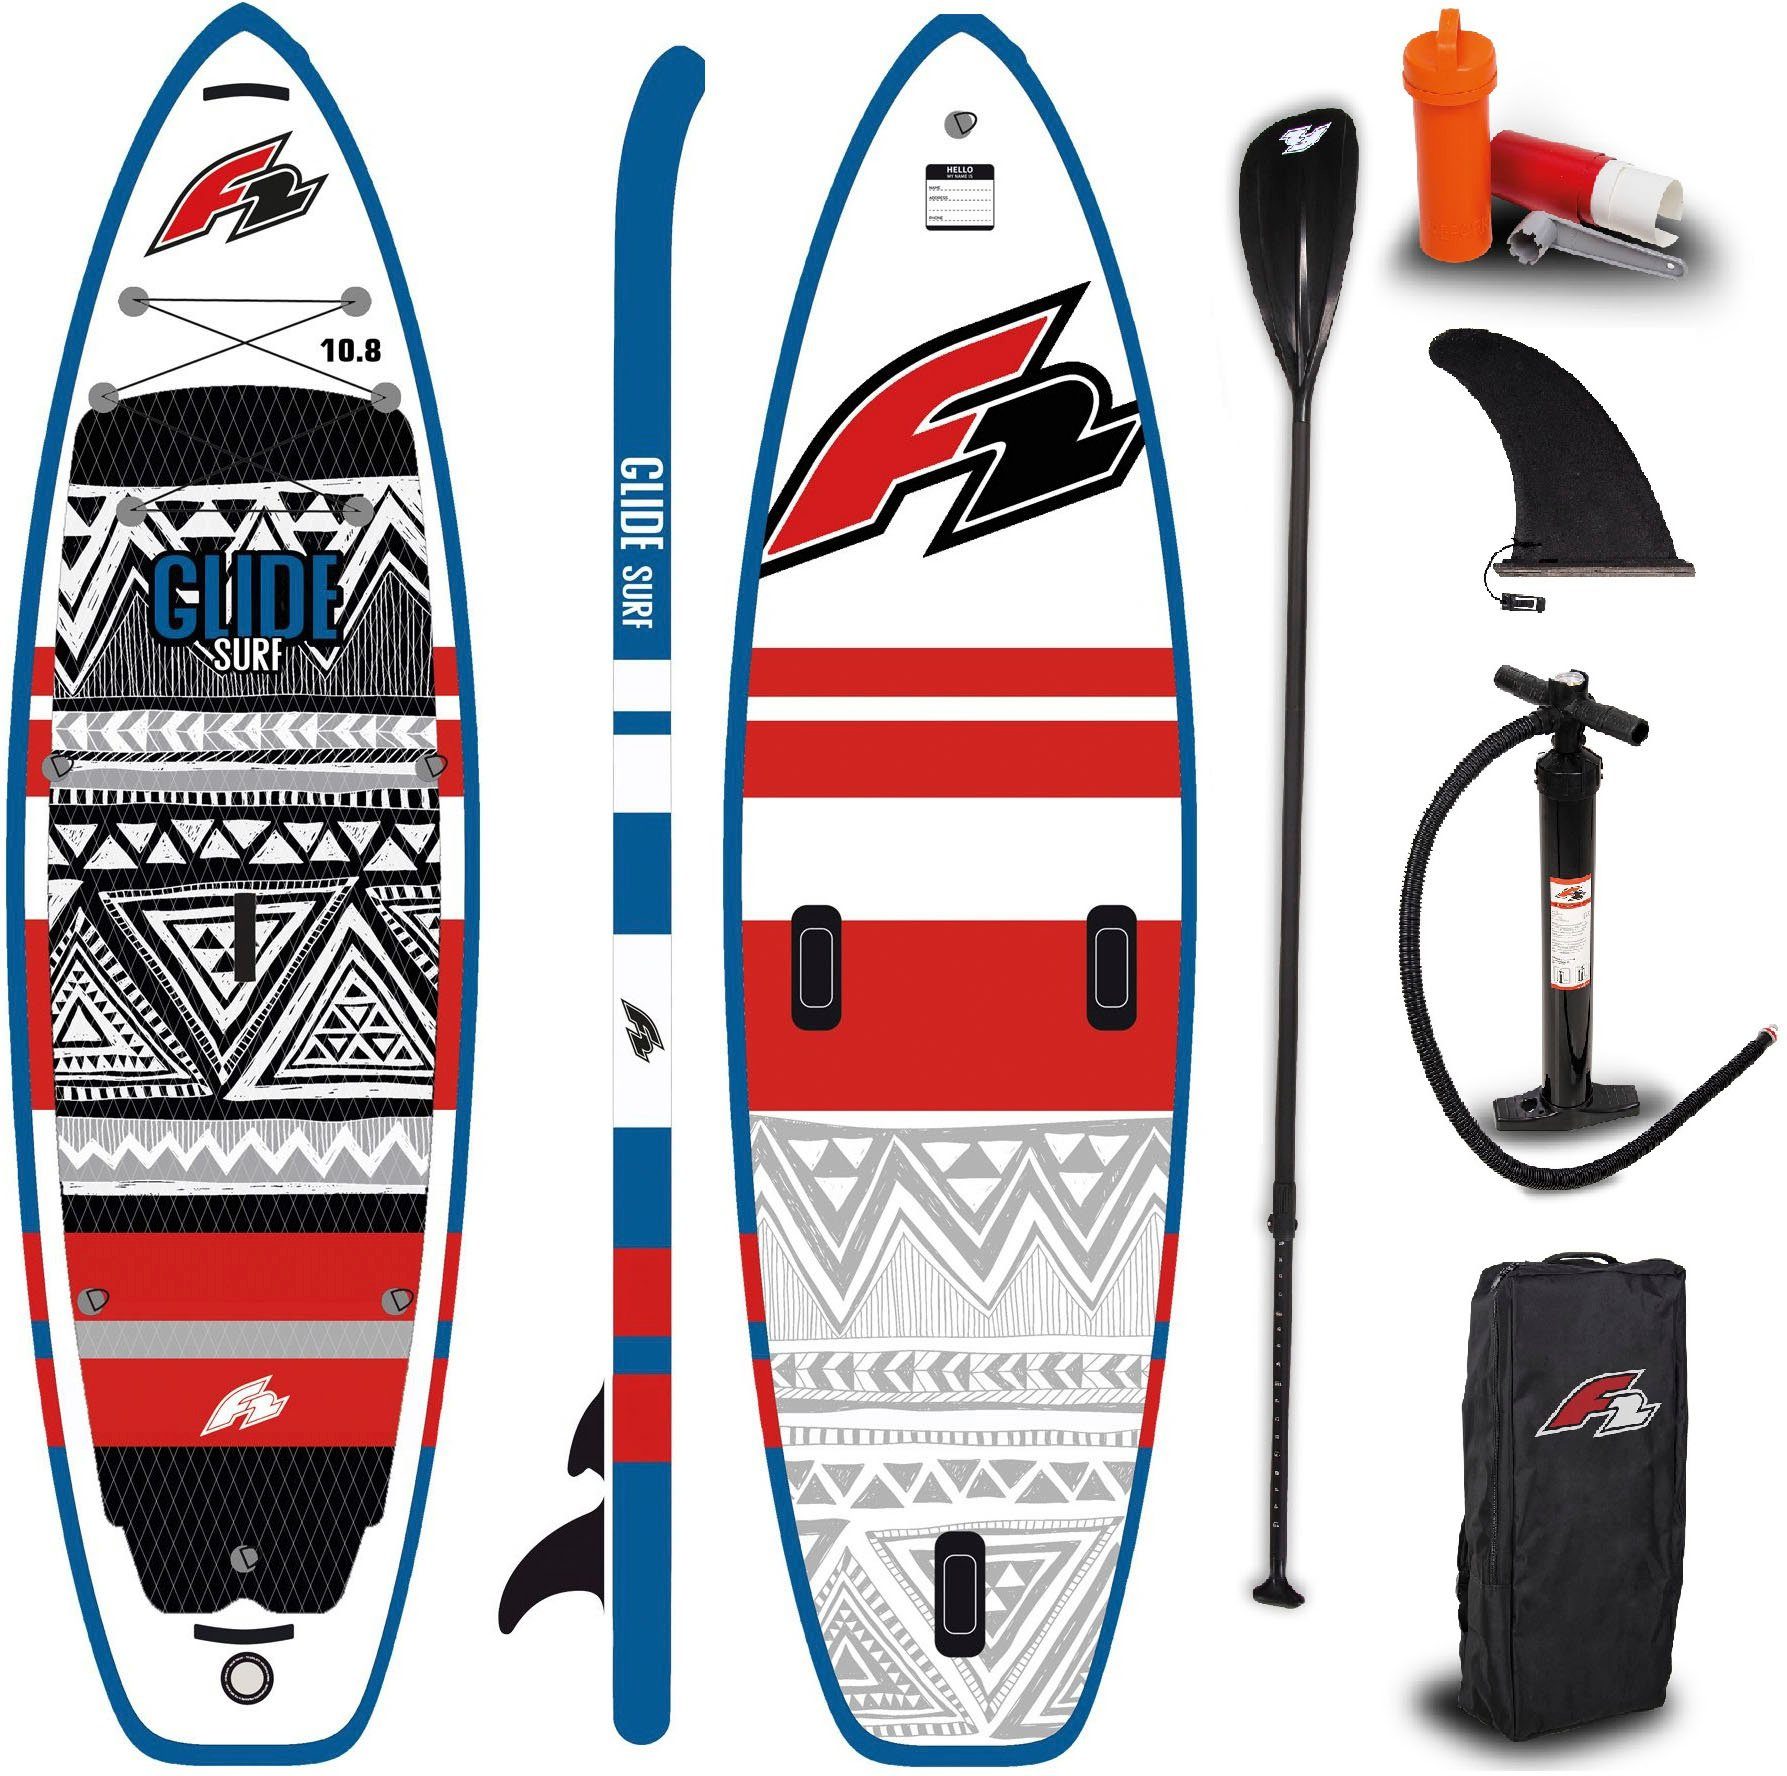 F2 Inflatable SUP-Board Glide Surf 5 red, tlg) 10,8 (Packung